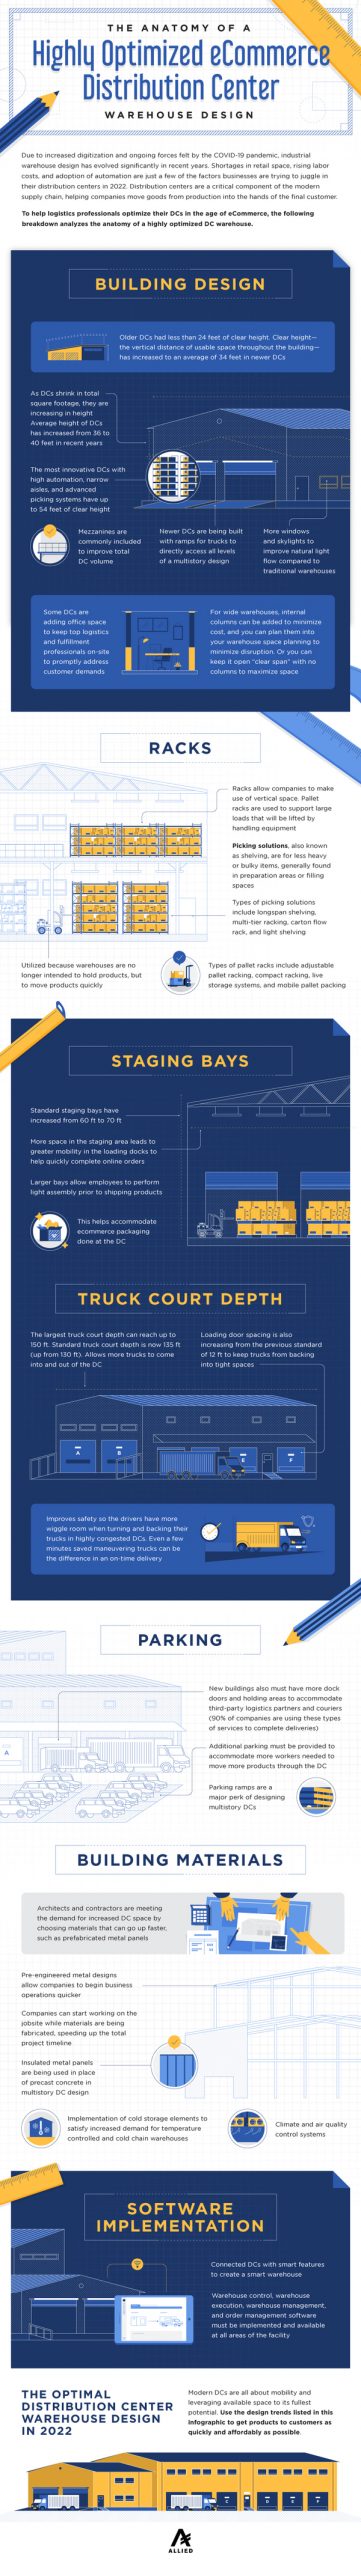 The Anatomy of a Highly Optimized eCommerce Distribution Center infographic